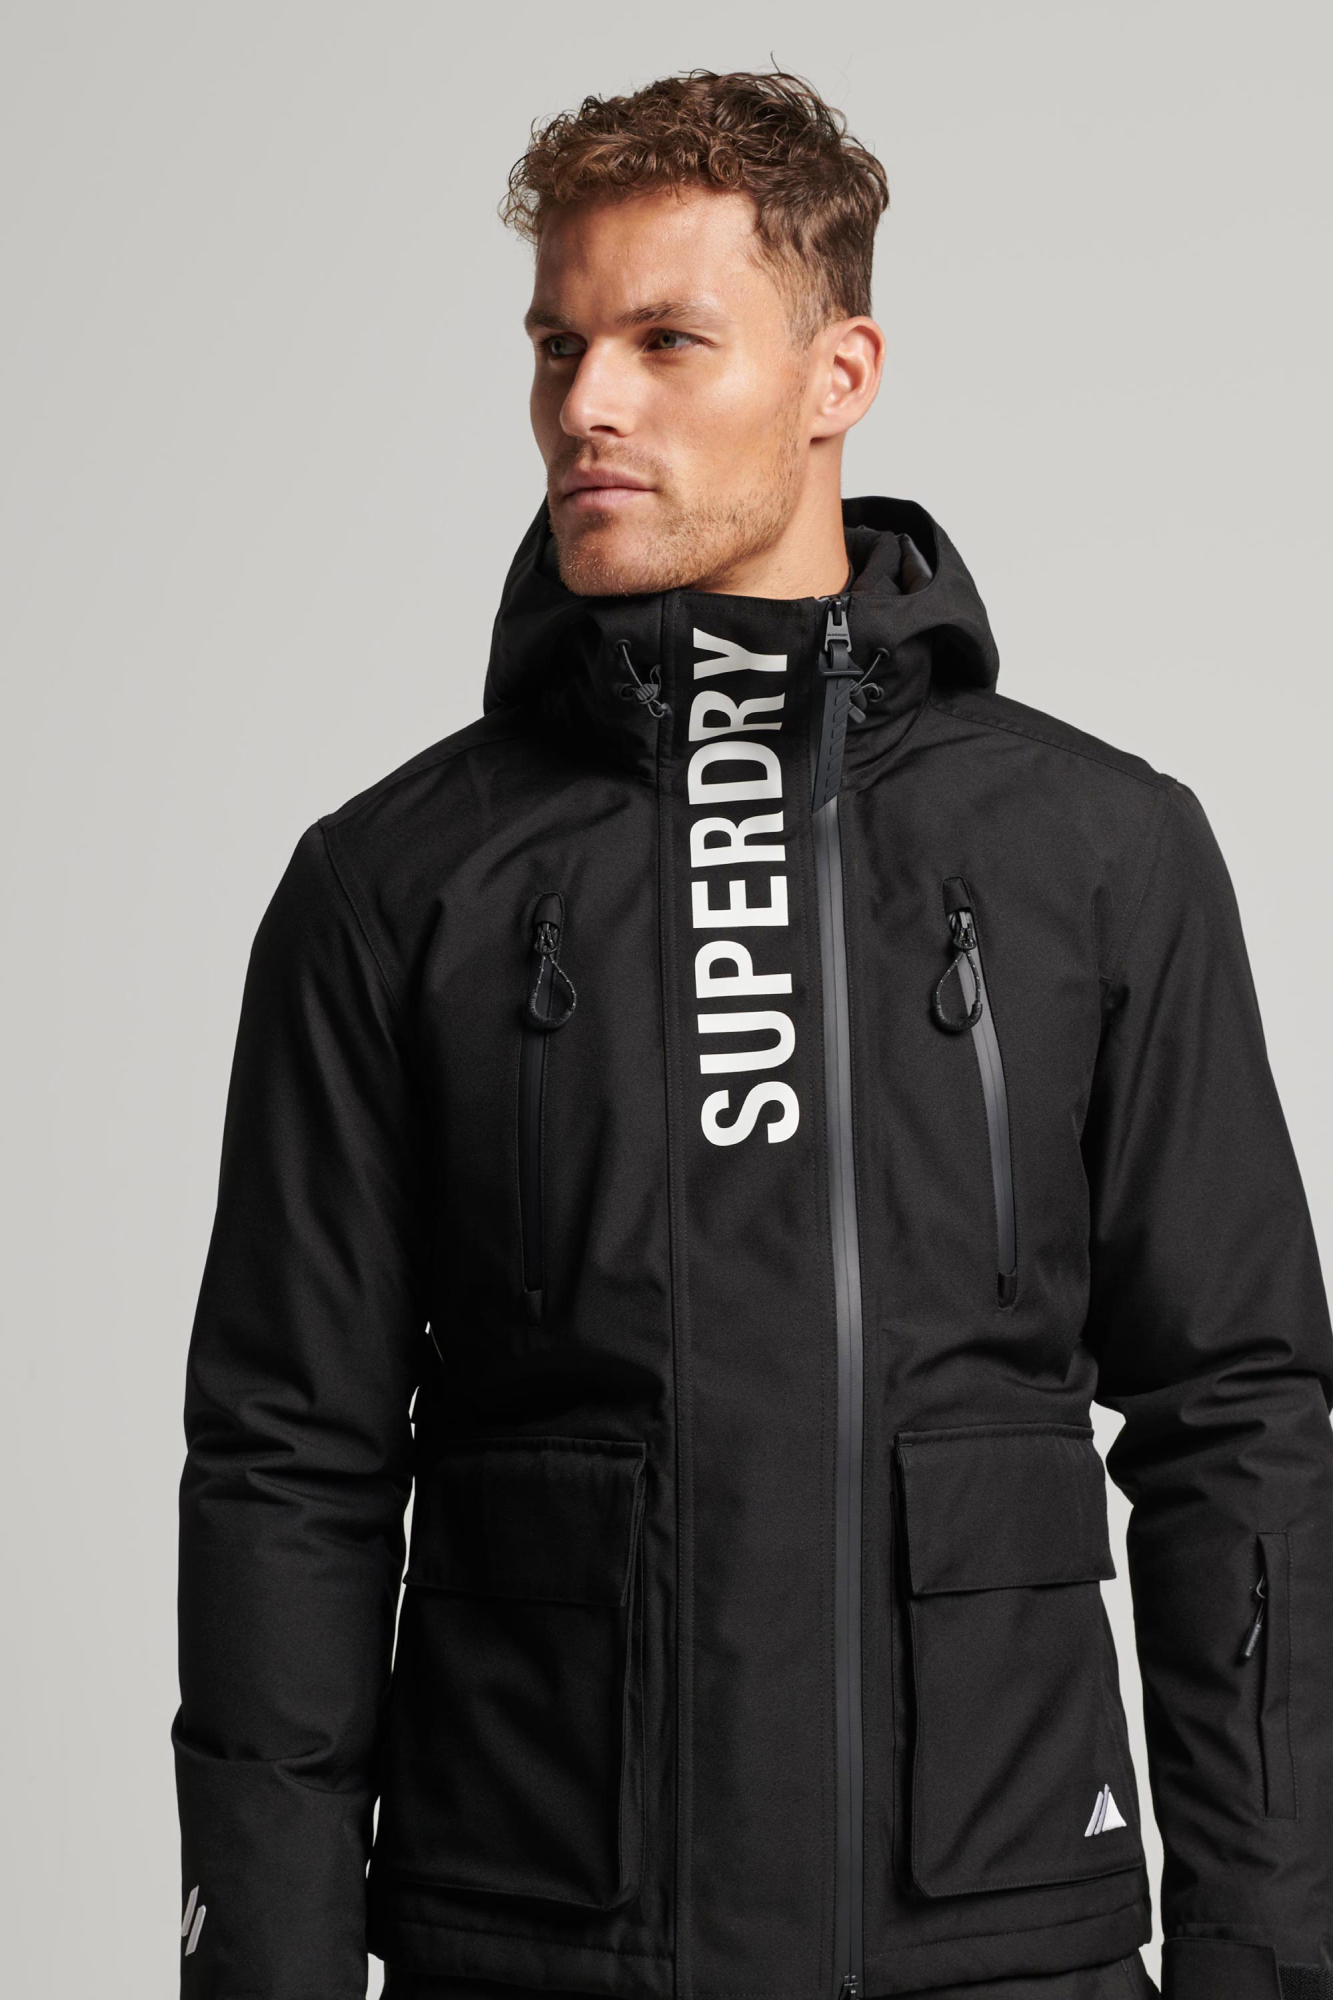 Superdry Mens Rescue Jacket Black - Size: Small